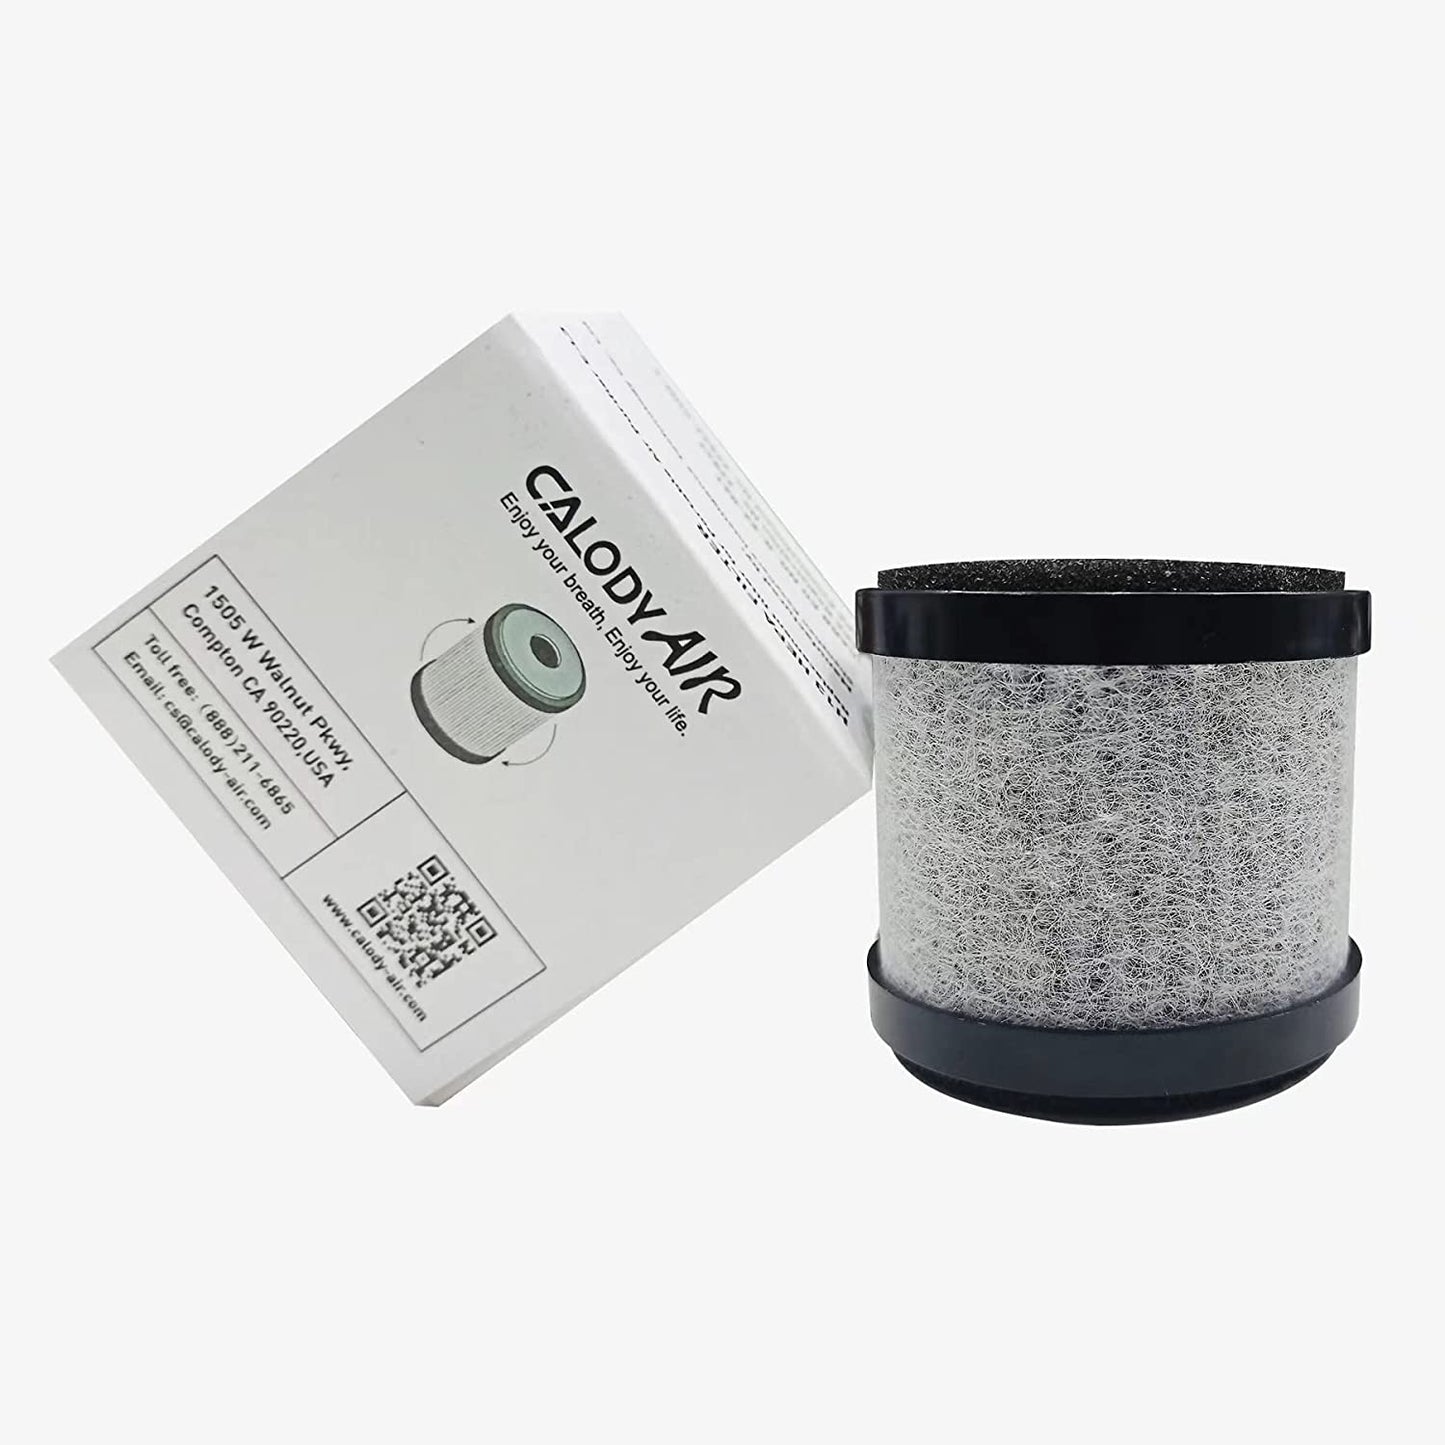 CALODY E-L3 Portable HEPA Air Purifier Replacement Filter, 3-in-1 Pre-Filter, H13 True HEPA Filter, Activated Carbon Filter, Pack of 1